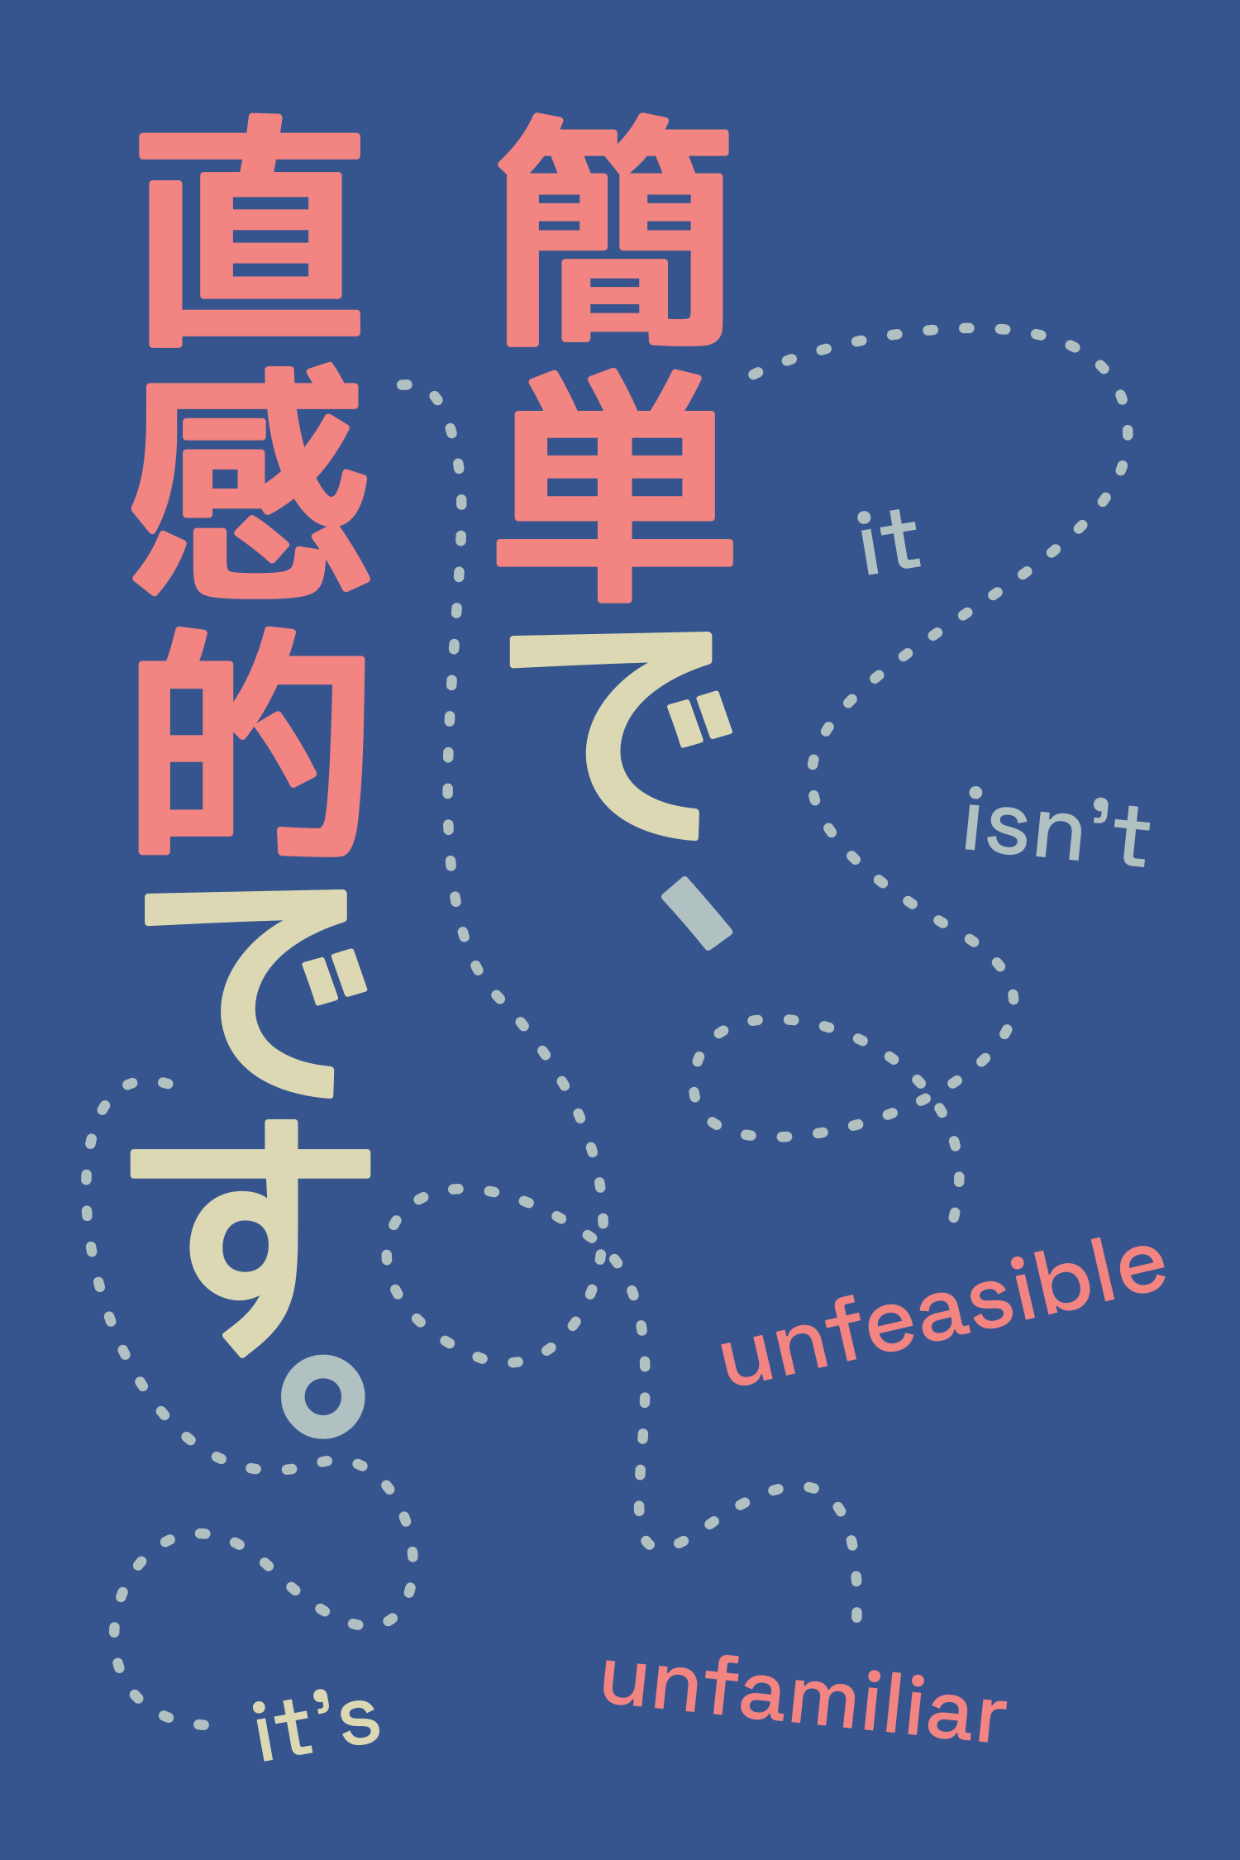 using English and Japanese to show contrast in types of sentence structure. the Japanese text reads, "it's easy, it's intuitive." while sentences in English generally follow a subject-verb-object order, Japanese places verbs at the ends of sentences, with verb objects coming before them. 